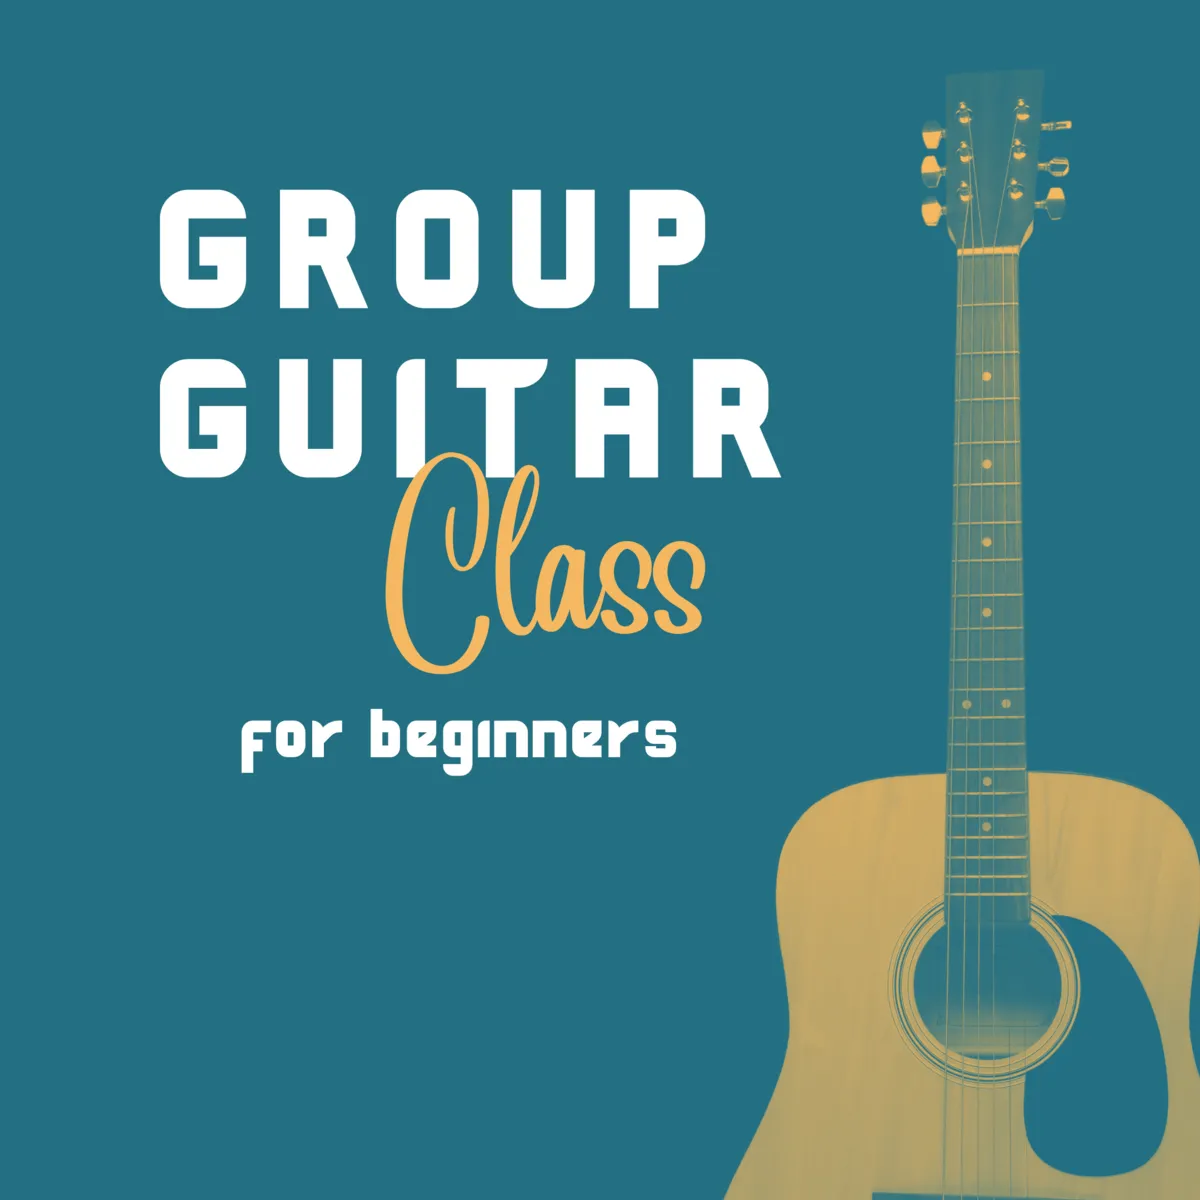 Group Guitar Lessons for Beginners